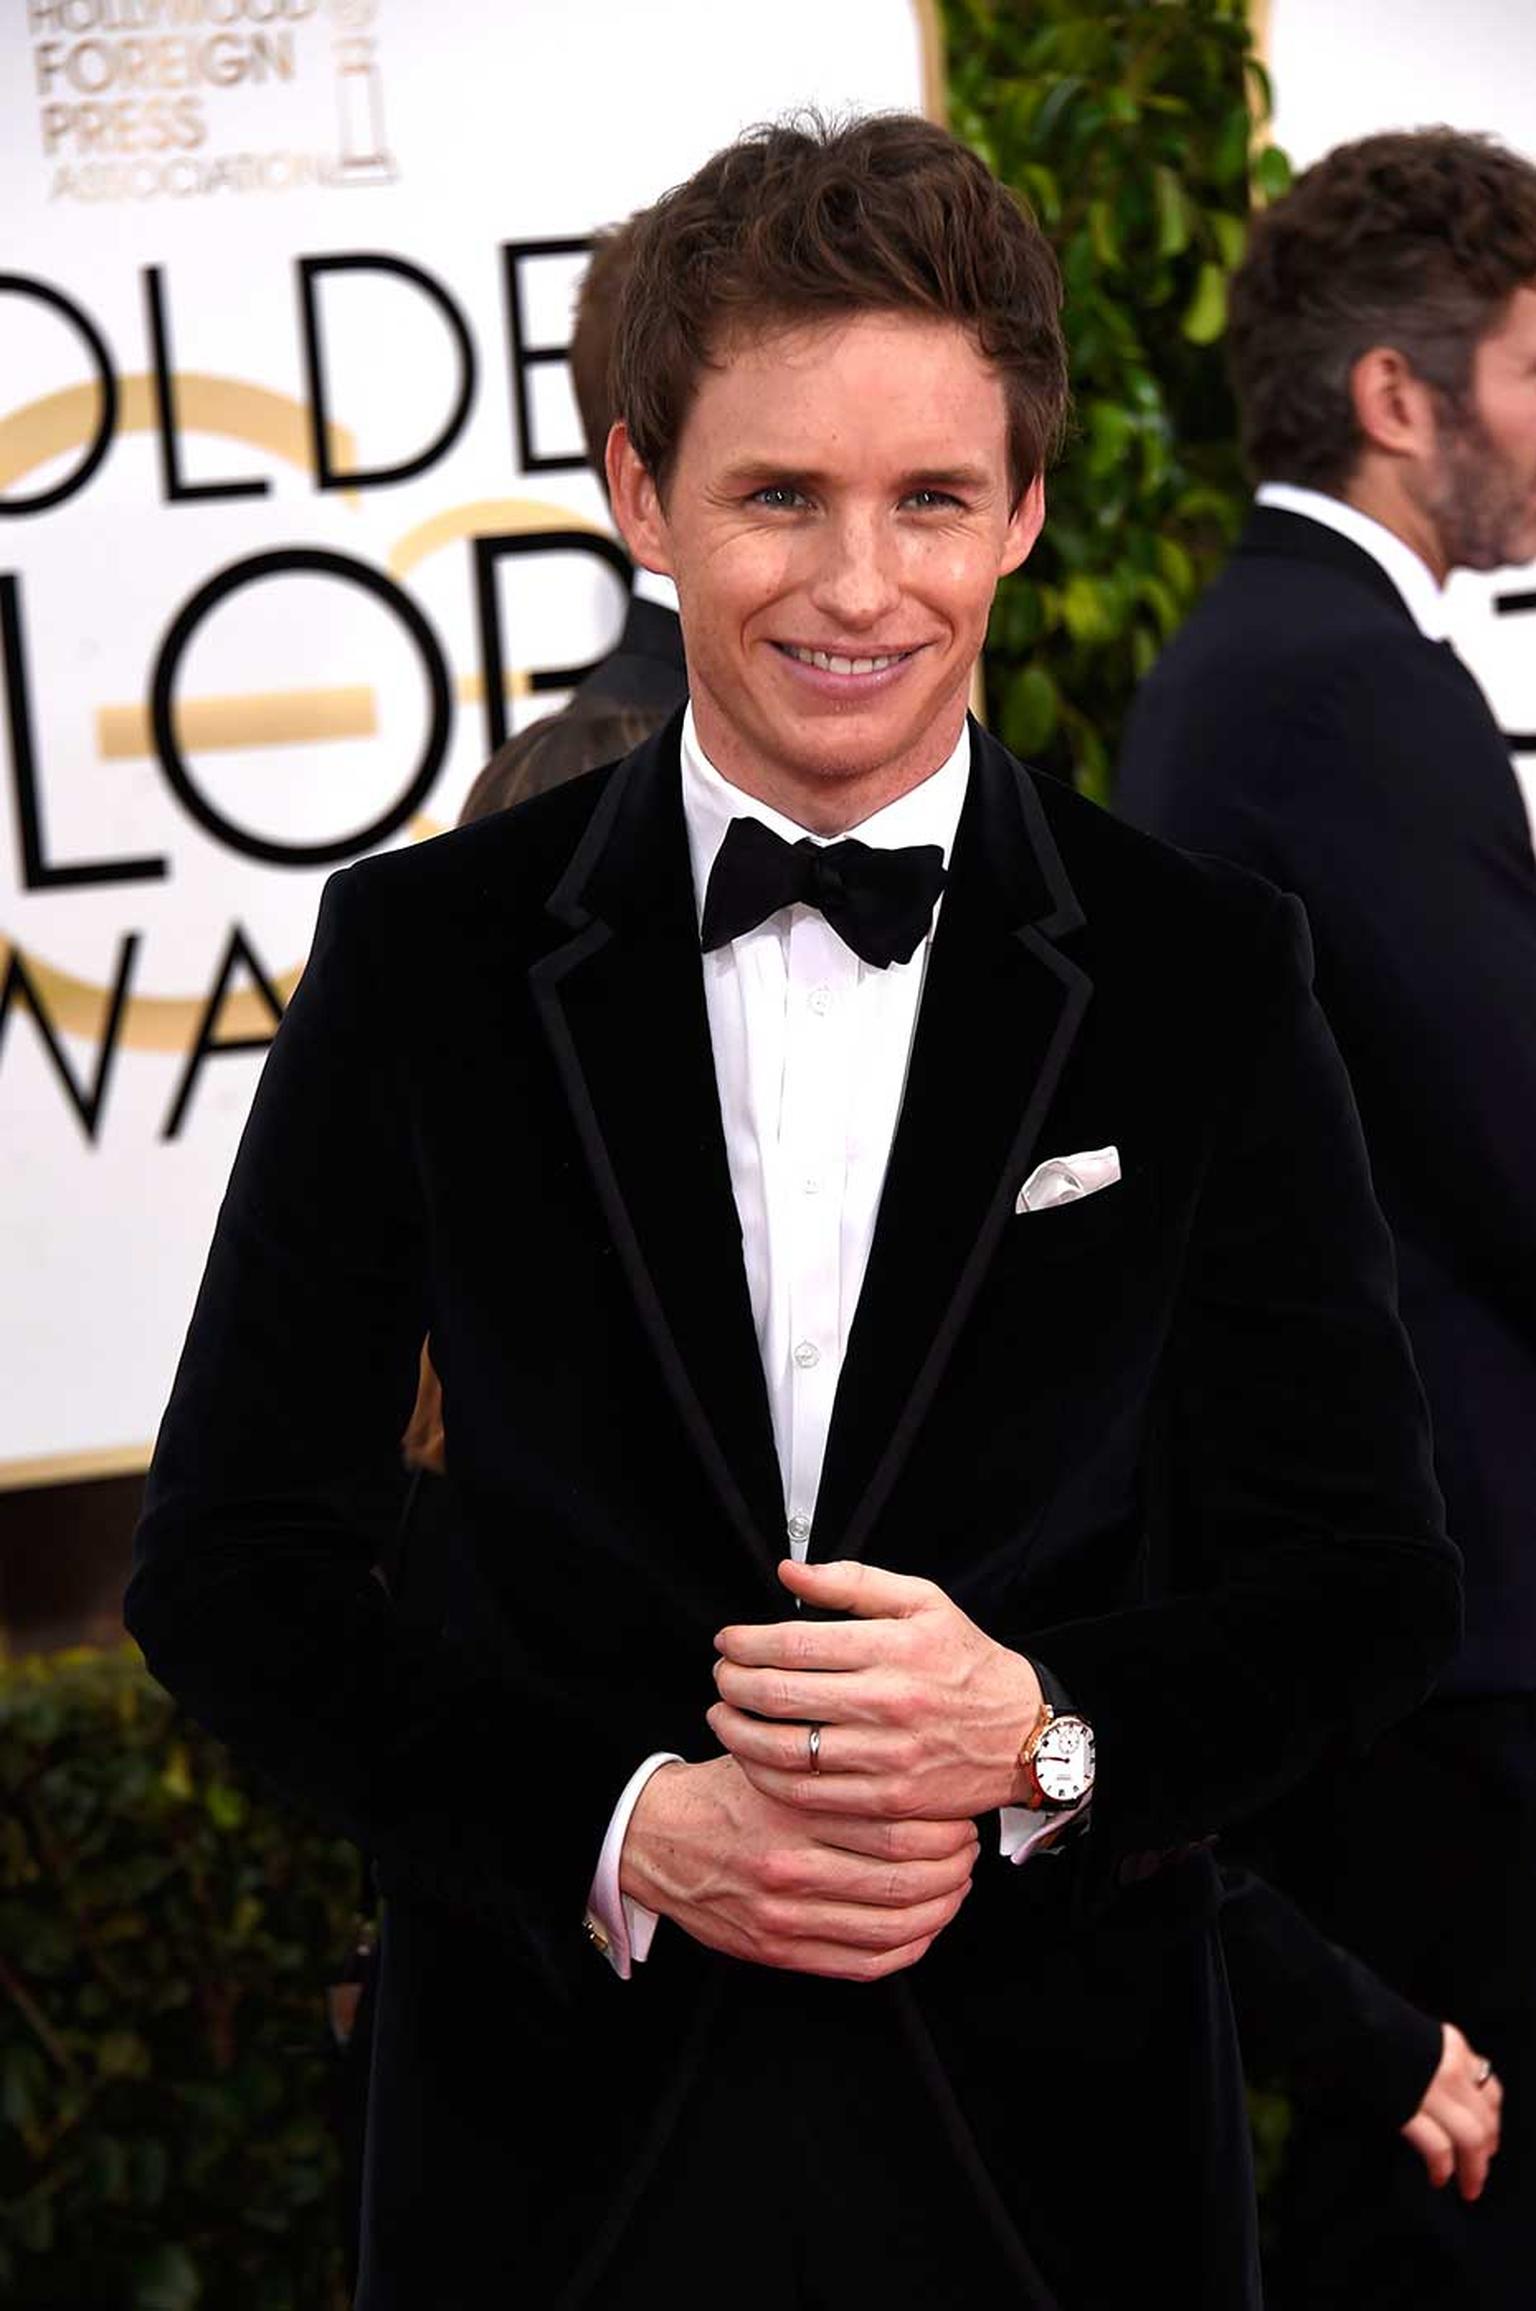 British actor Eddie Redmayne walked the Golden Globes red carpet wearing a Chopard Classic Manufacture watch in rose gold.